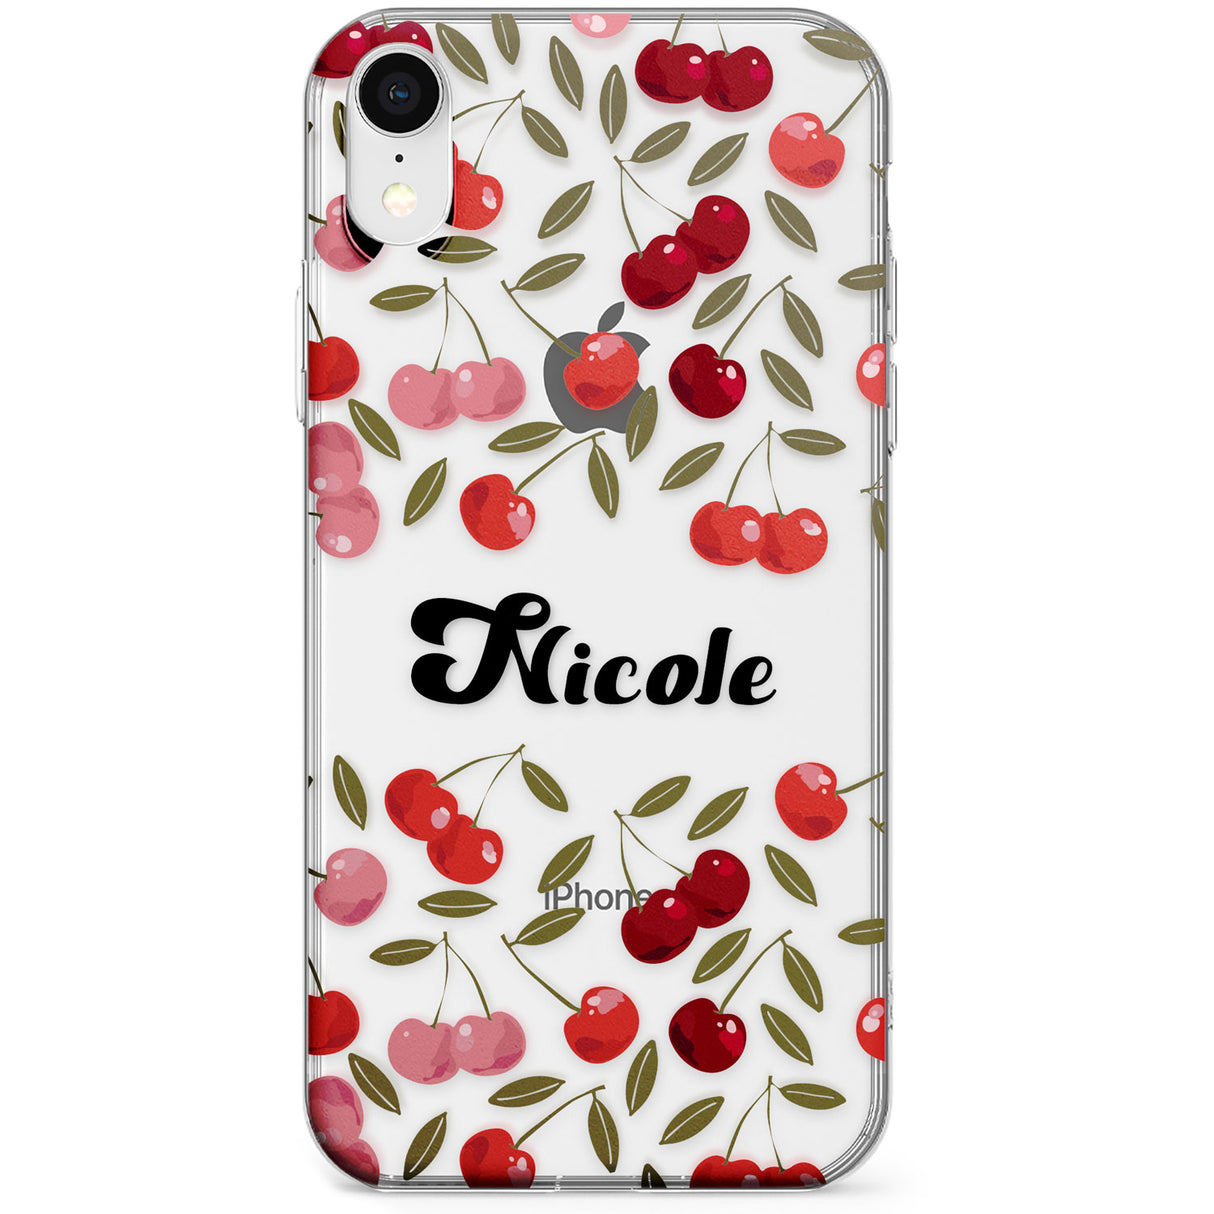 Personalised Cherry Pattern Phone Case for iPhone X, XS Max, XR